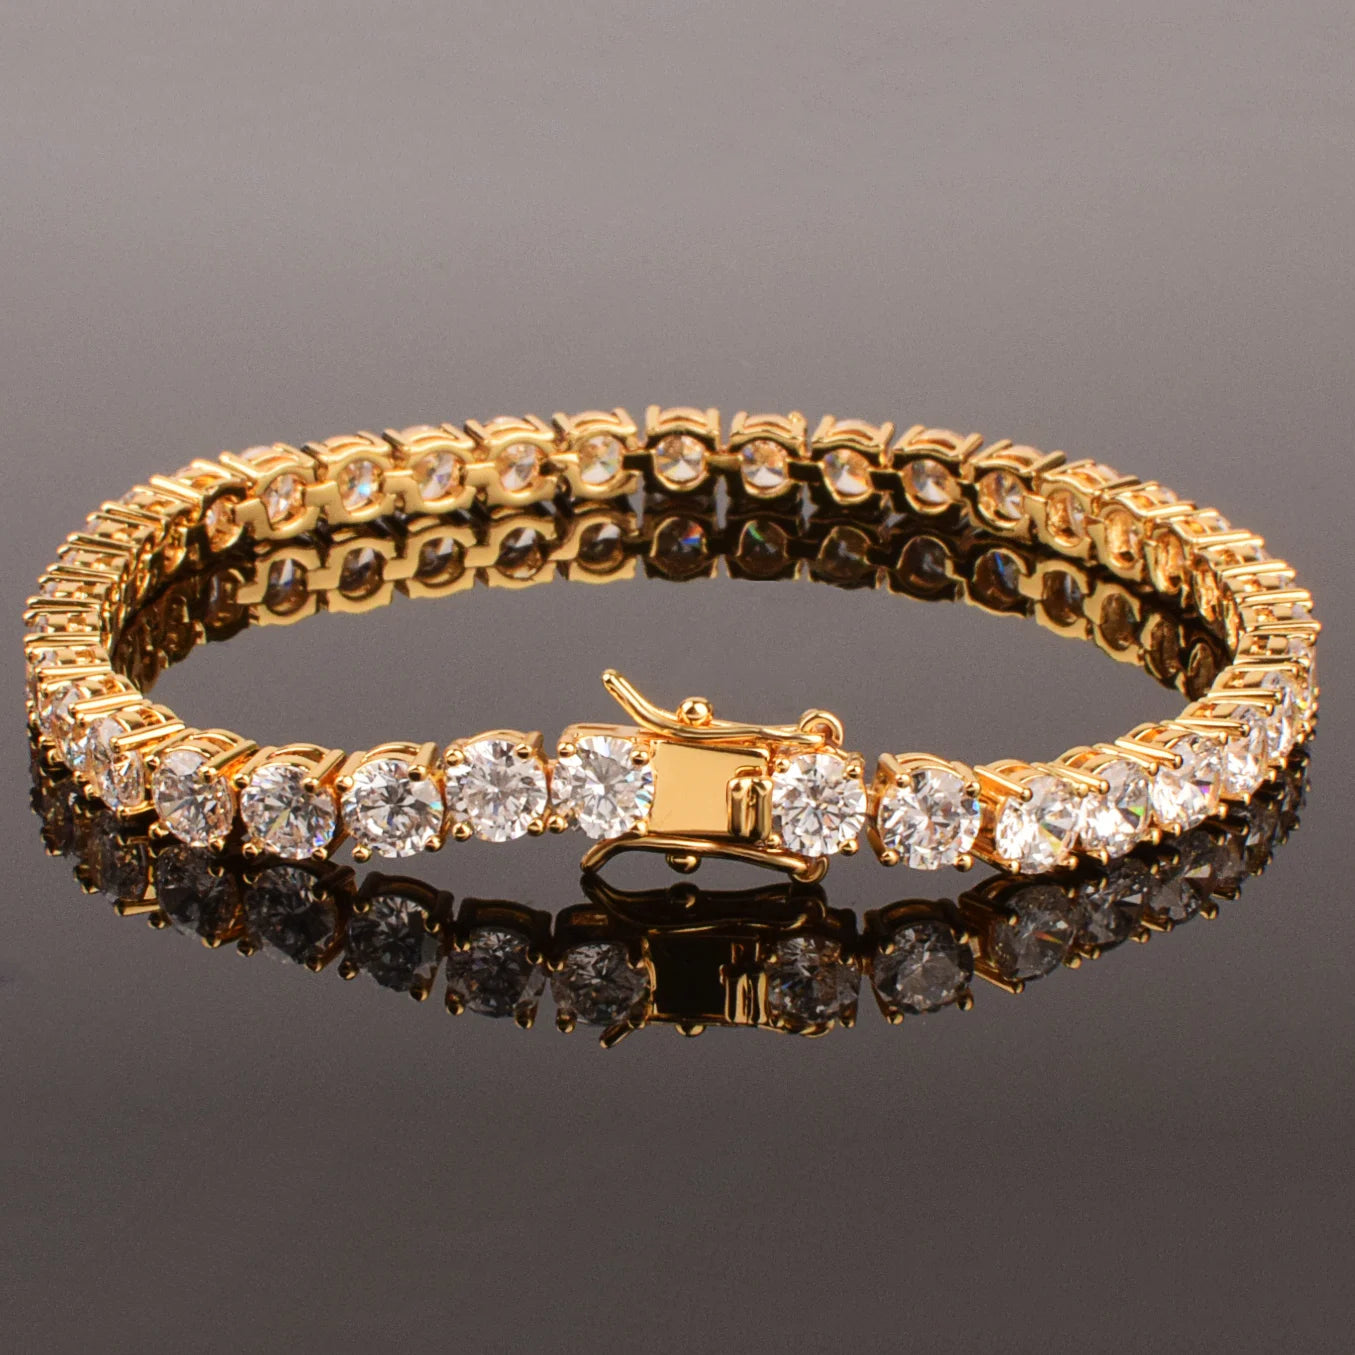 Tennis Link Bracelet For Men Gold Color 1 Row Cubic Zirconia Chain Hip Hop Jewelry 3mm 4mm - Fashionqueene.com